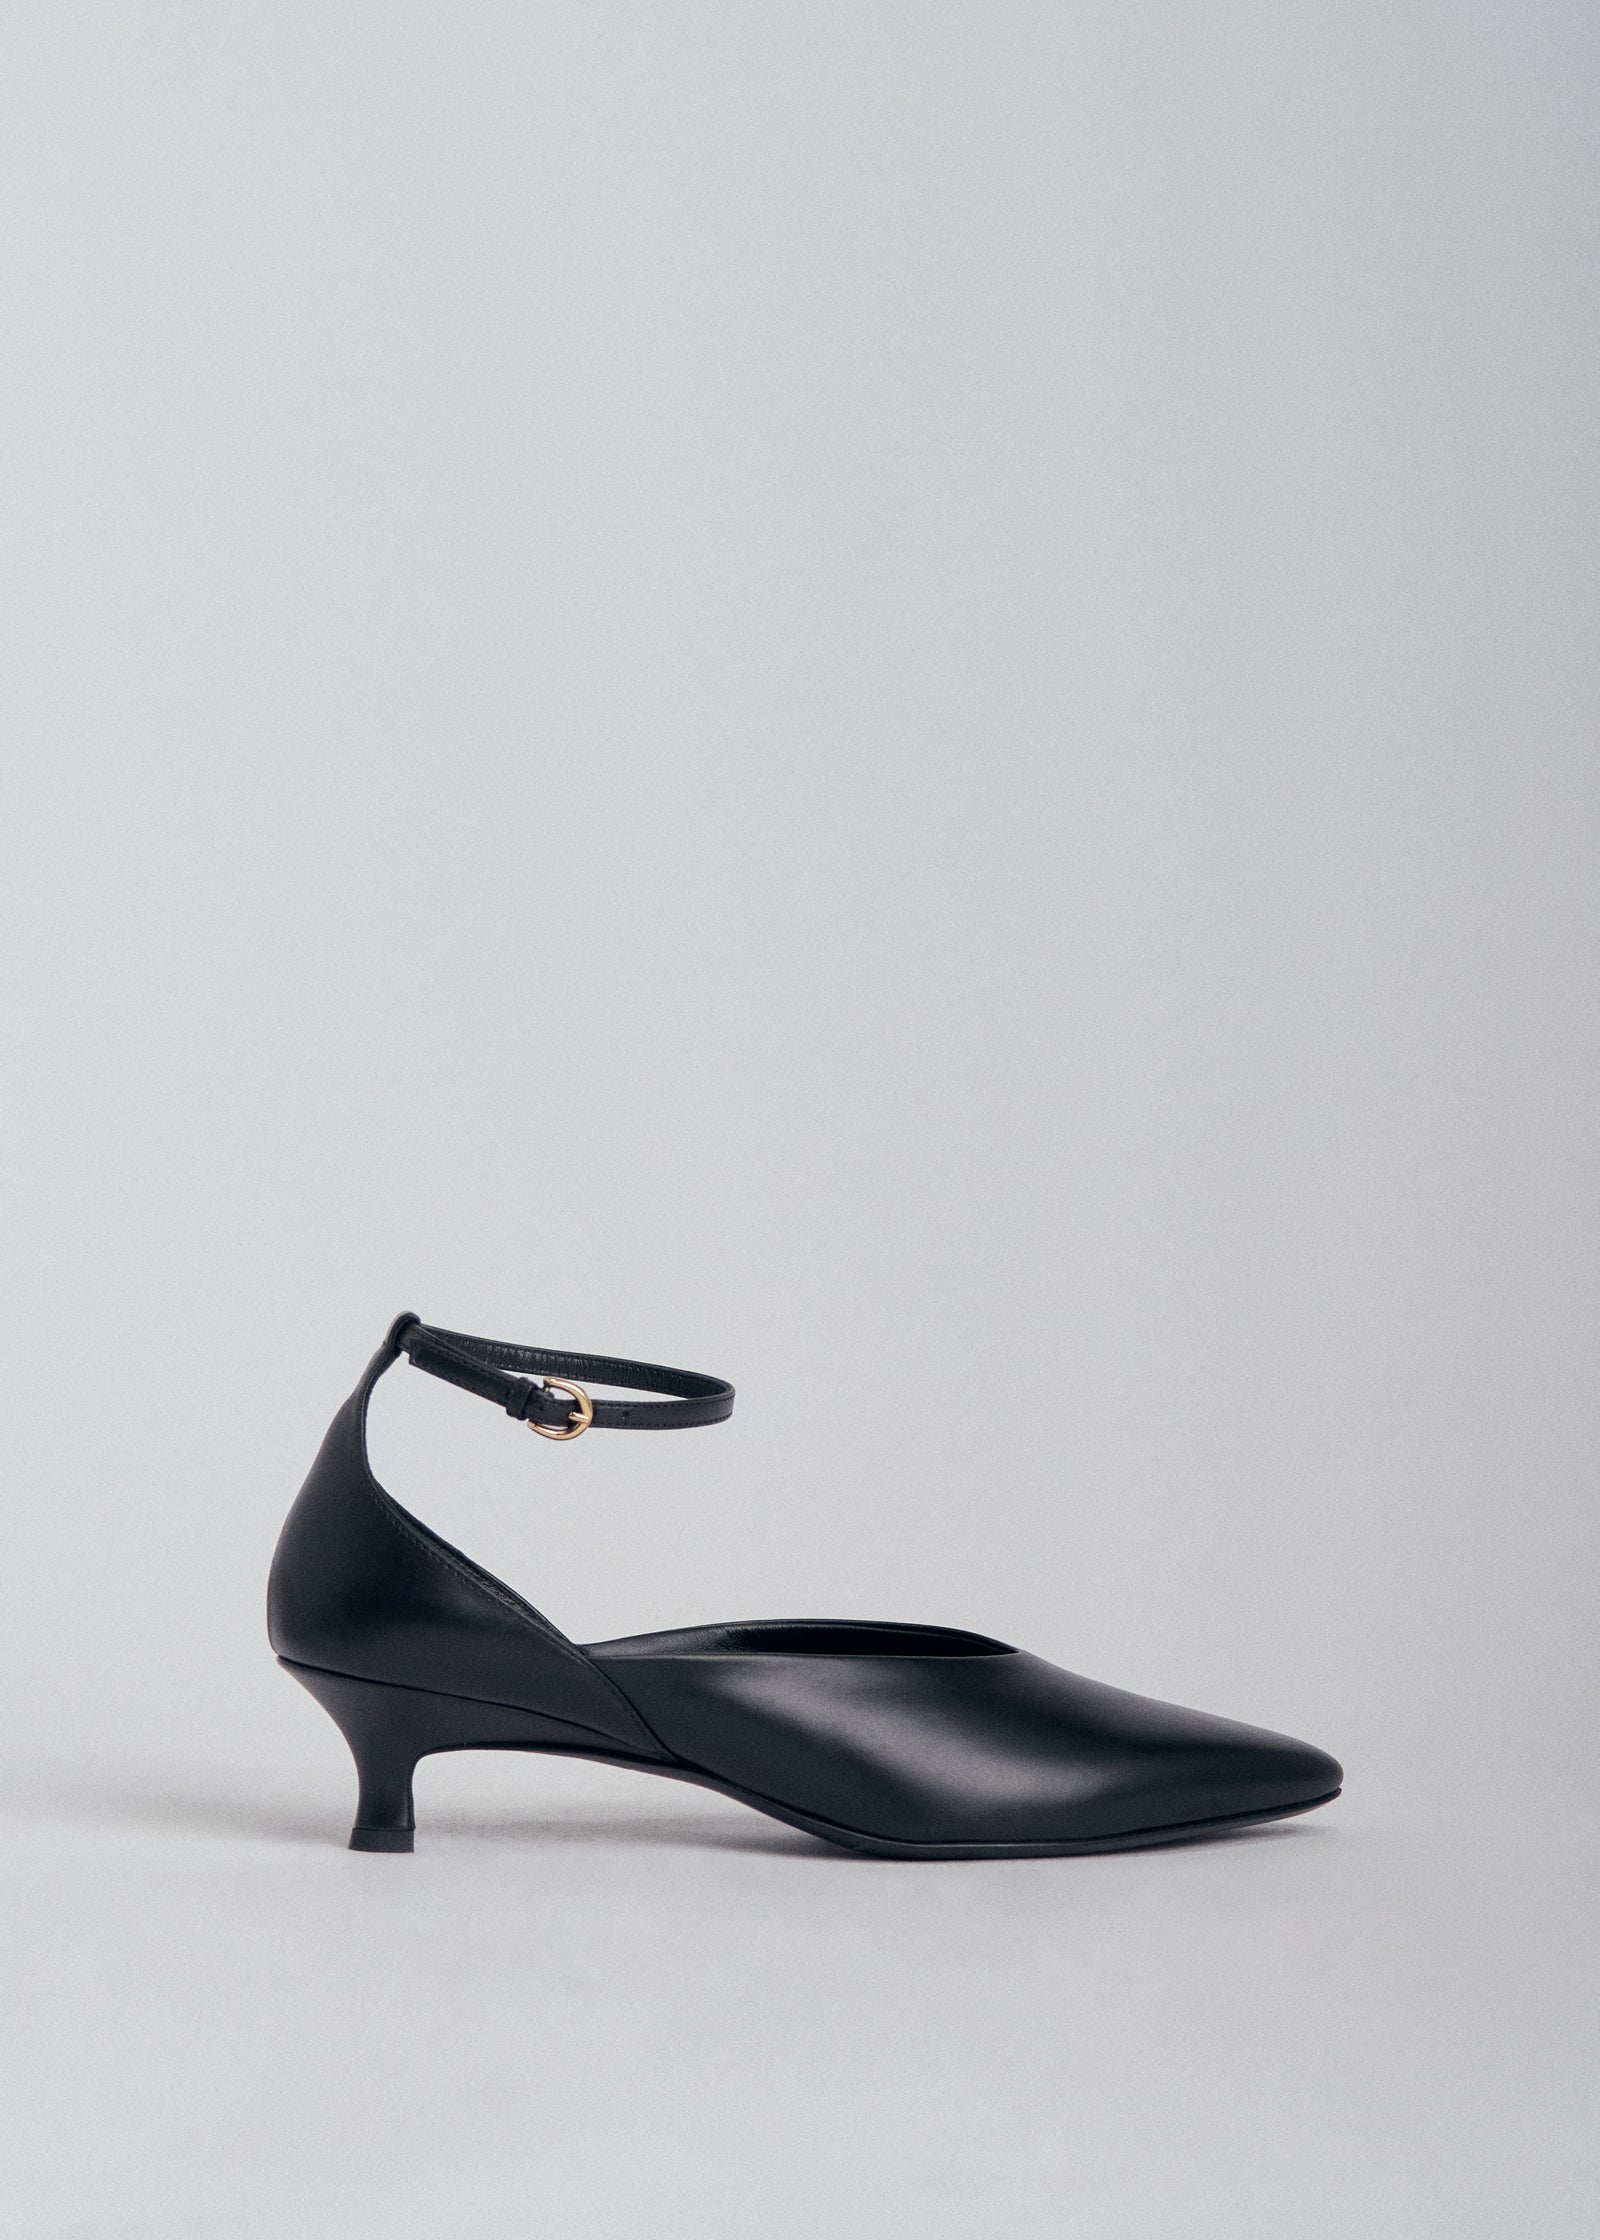 D'Orsay Kitten Heel in Leather -  Black - CO Collections